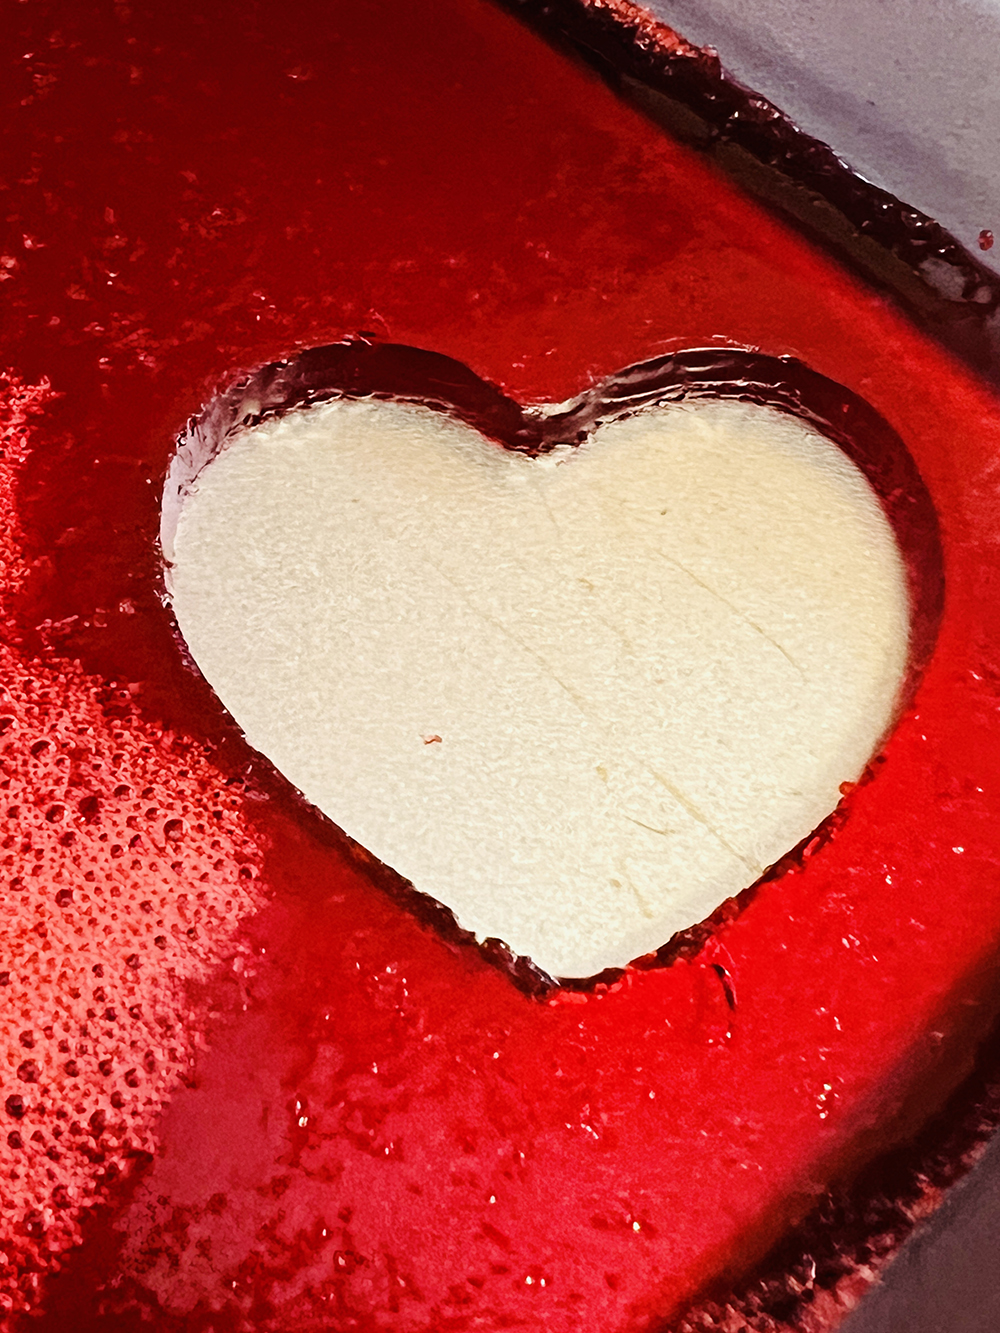 heart shape in a sheet of red jello